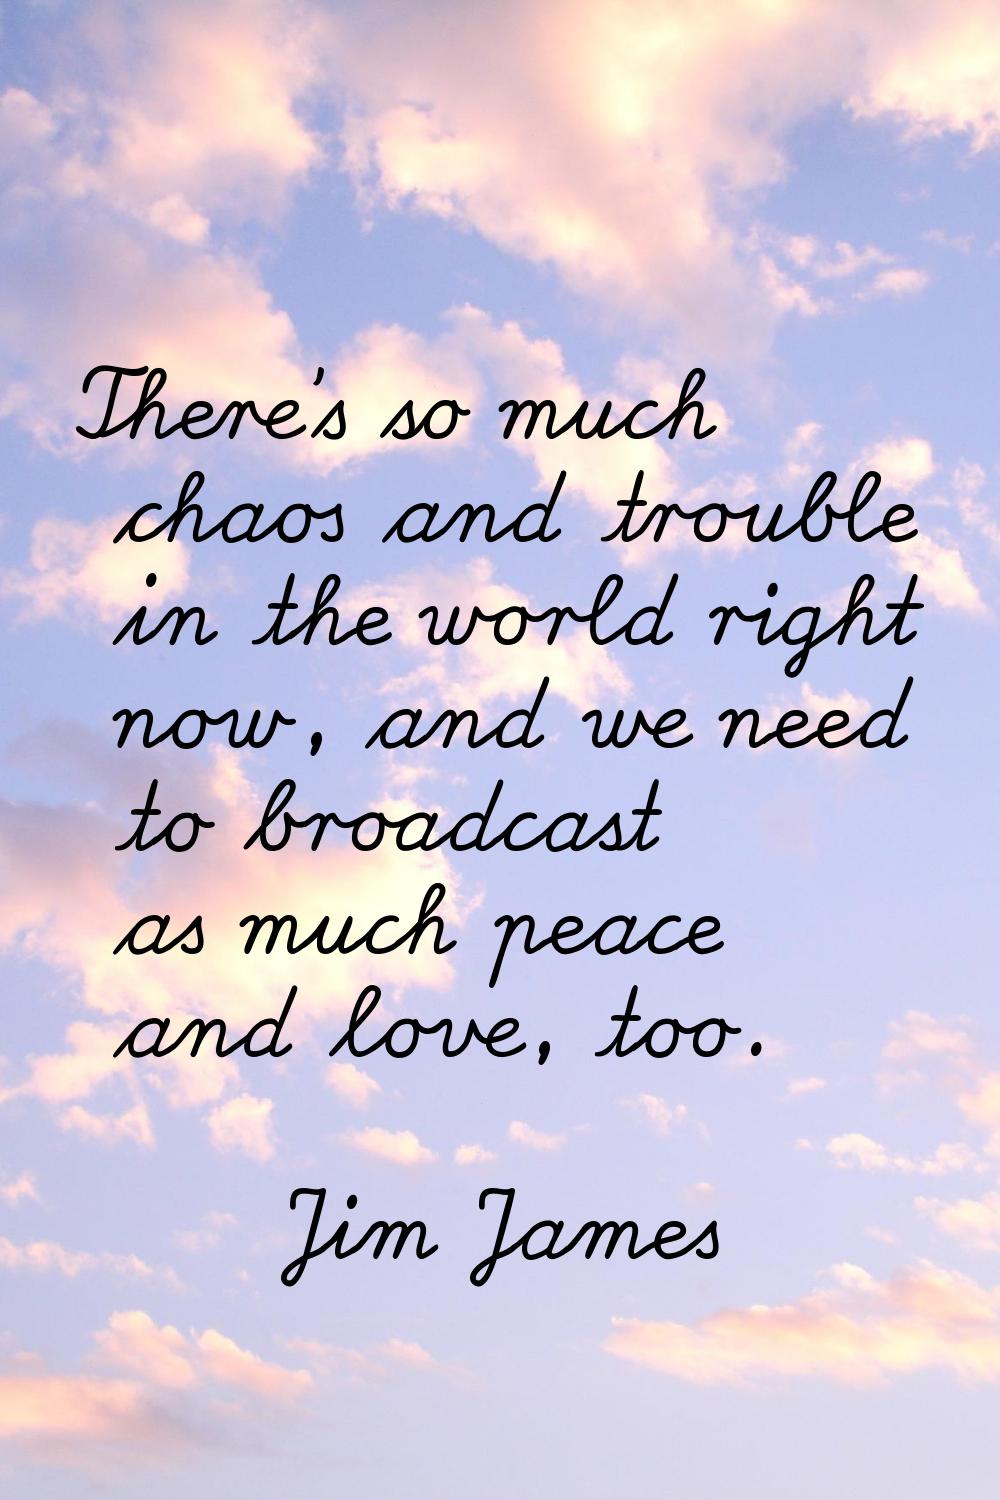 There's so much chaos and trouble in the world right now, and we need to broadcast as much peace an